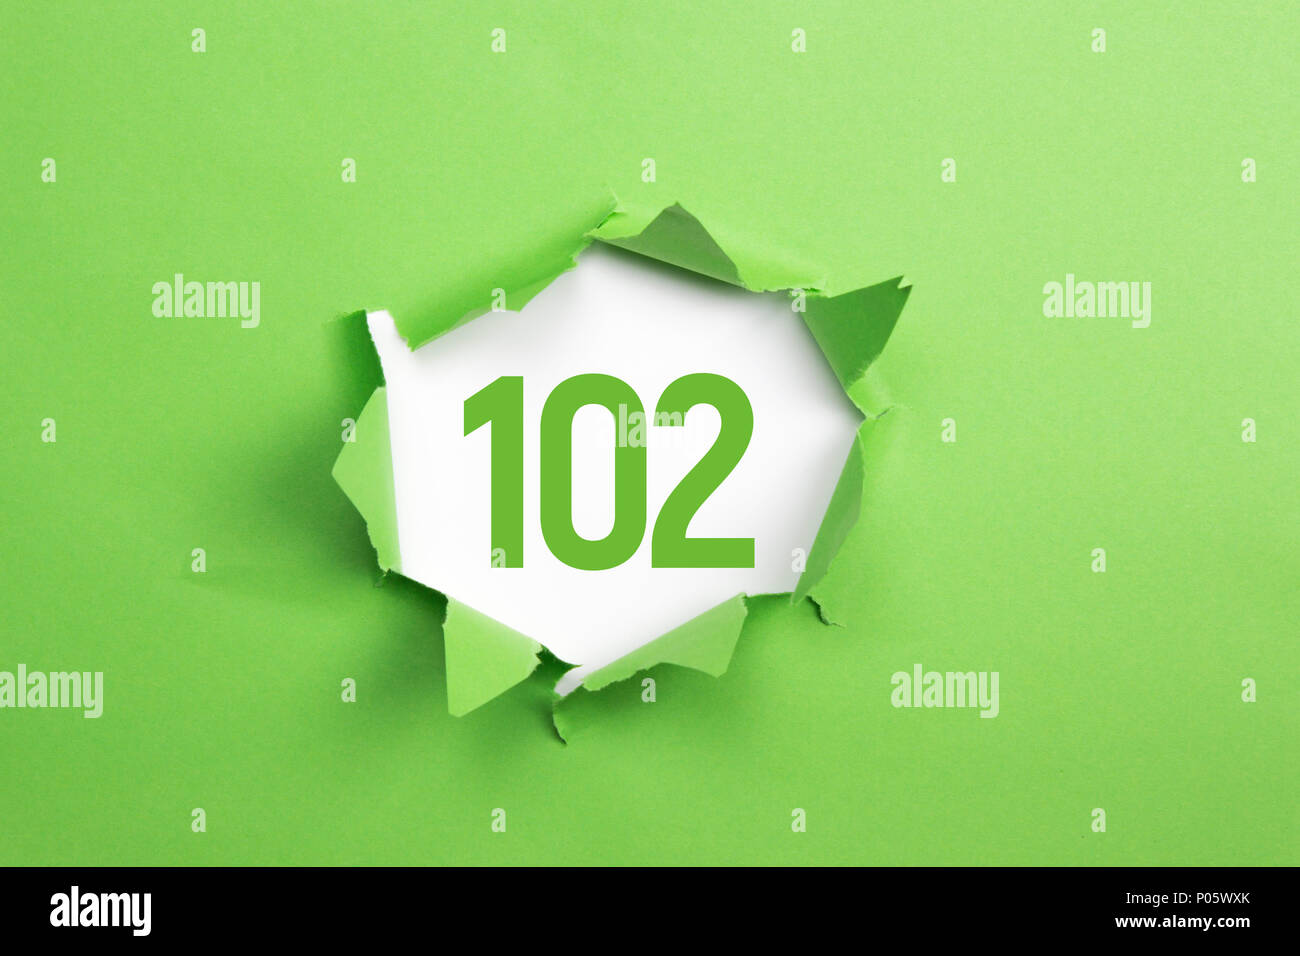 Green Number 158 on green paper background Stock Photo